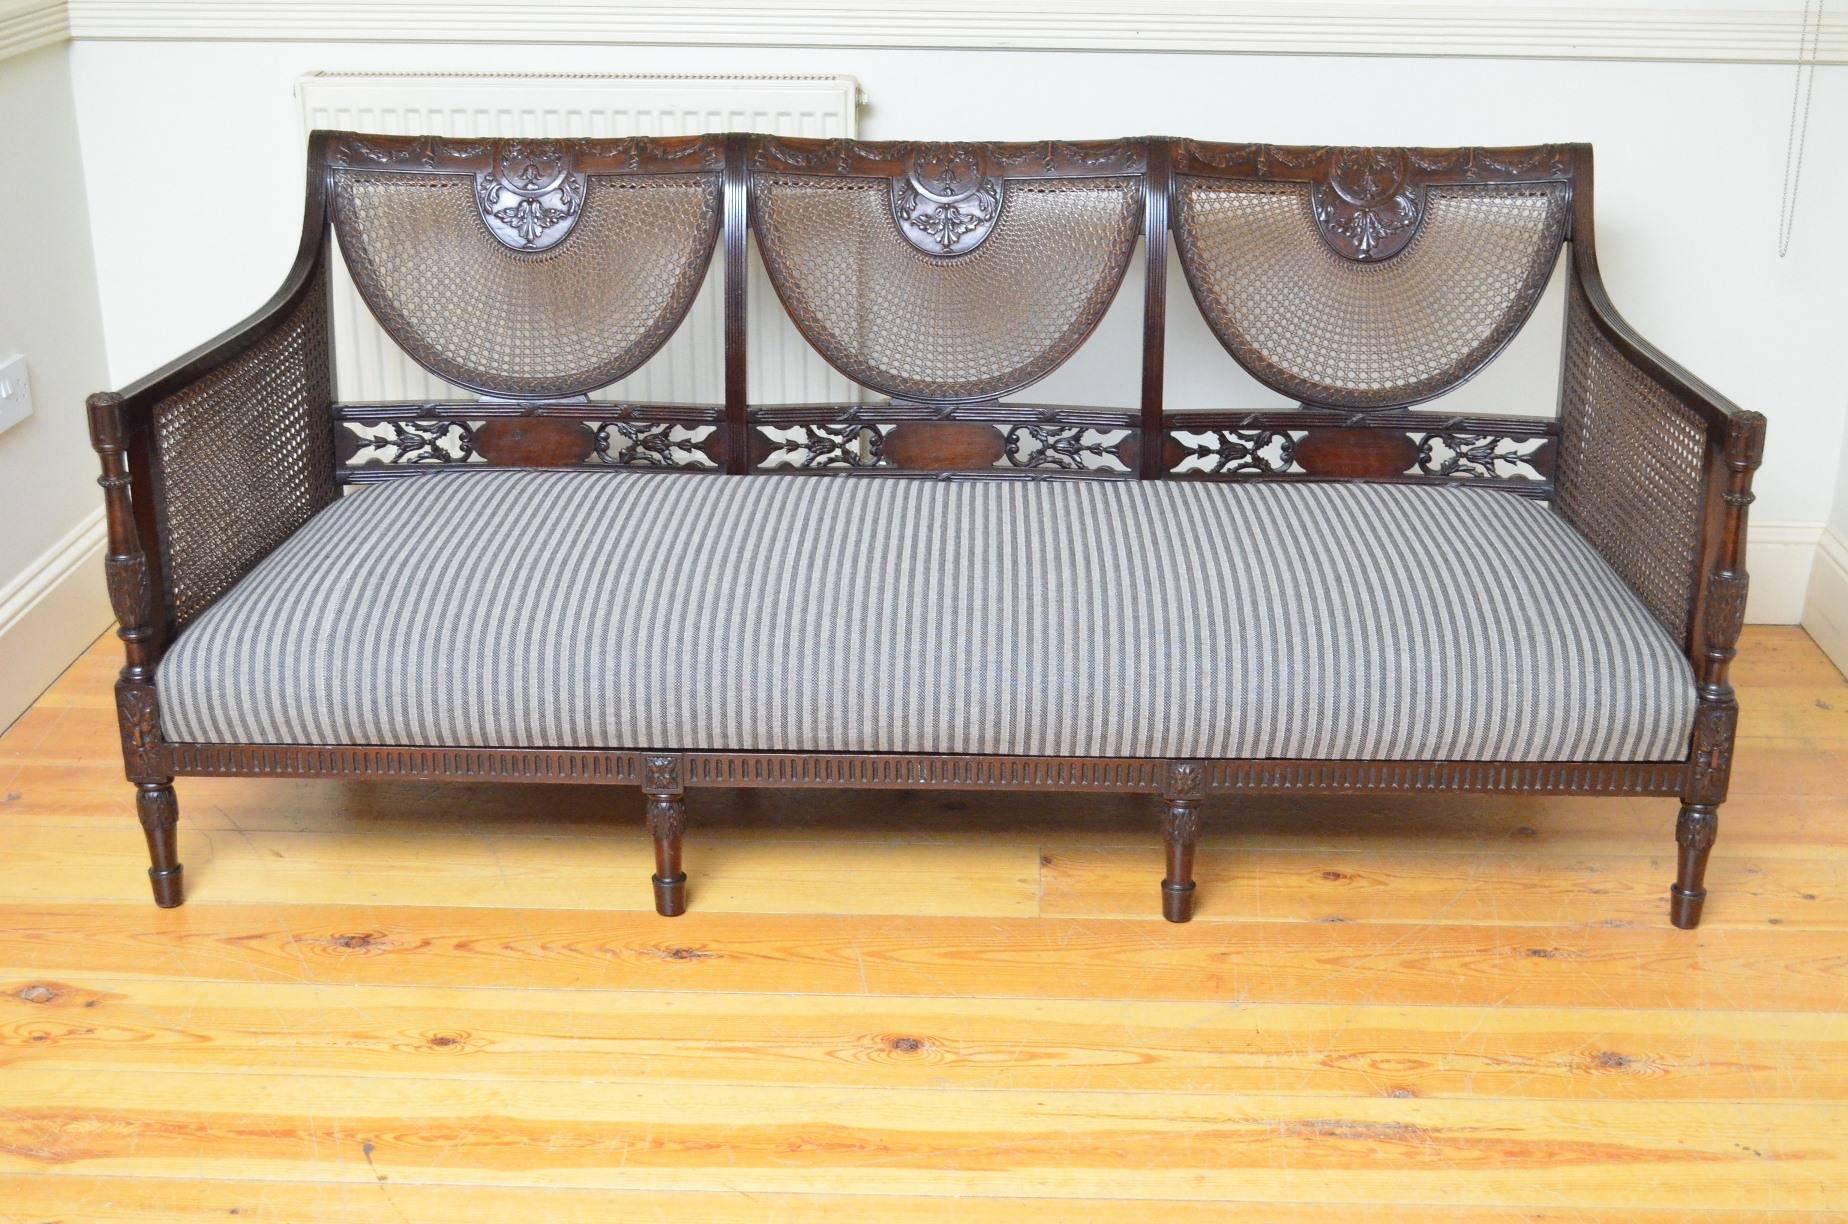 Sn4158 exceptional Edwardian mahogany bergere suite, comprising settee and two armchairs, having swag and bellflowers to top rails, finely carved mid rails, double caned arms and reeded front rails, all standing on turned and carved legs. This fine